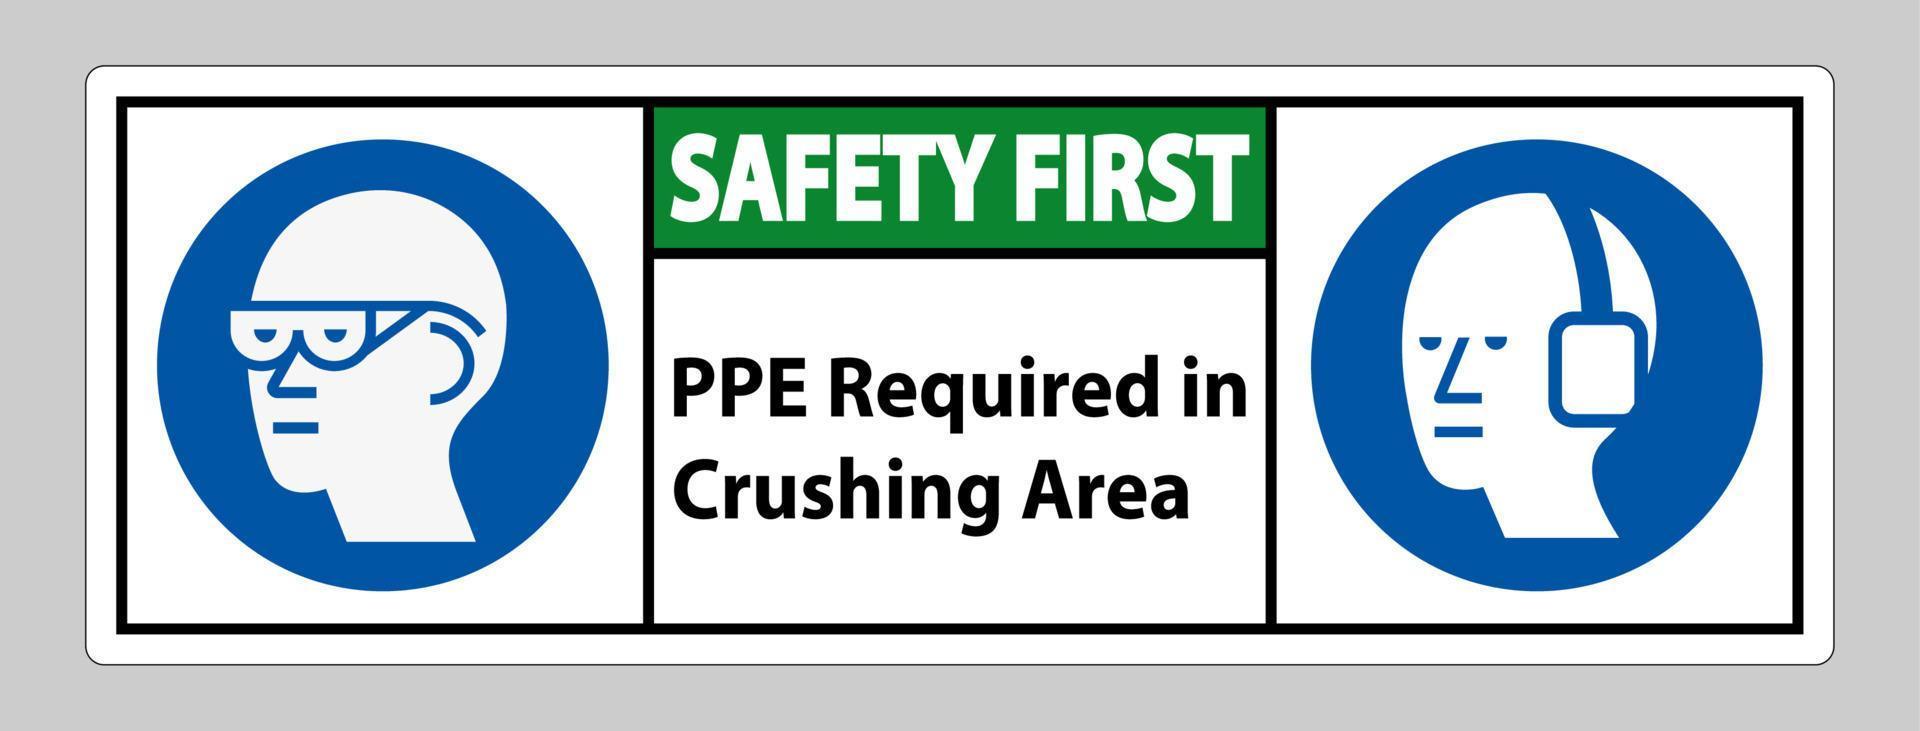 Safety First Sign PPE Required In Crushing Area Isolate on White Background vector